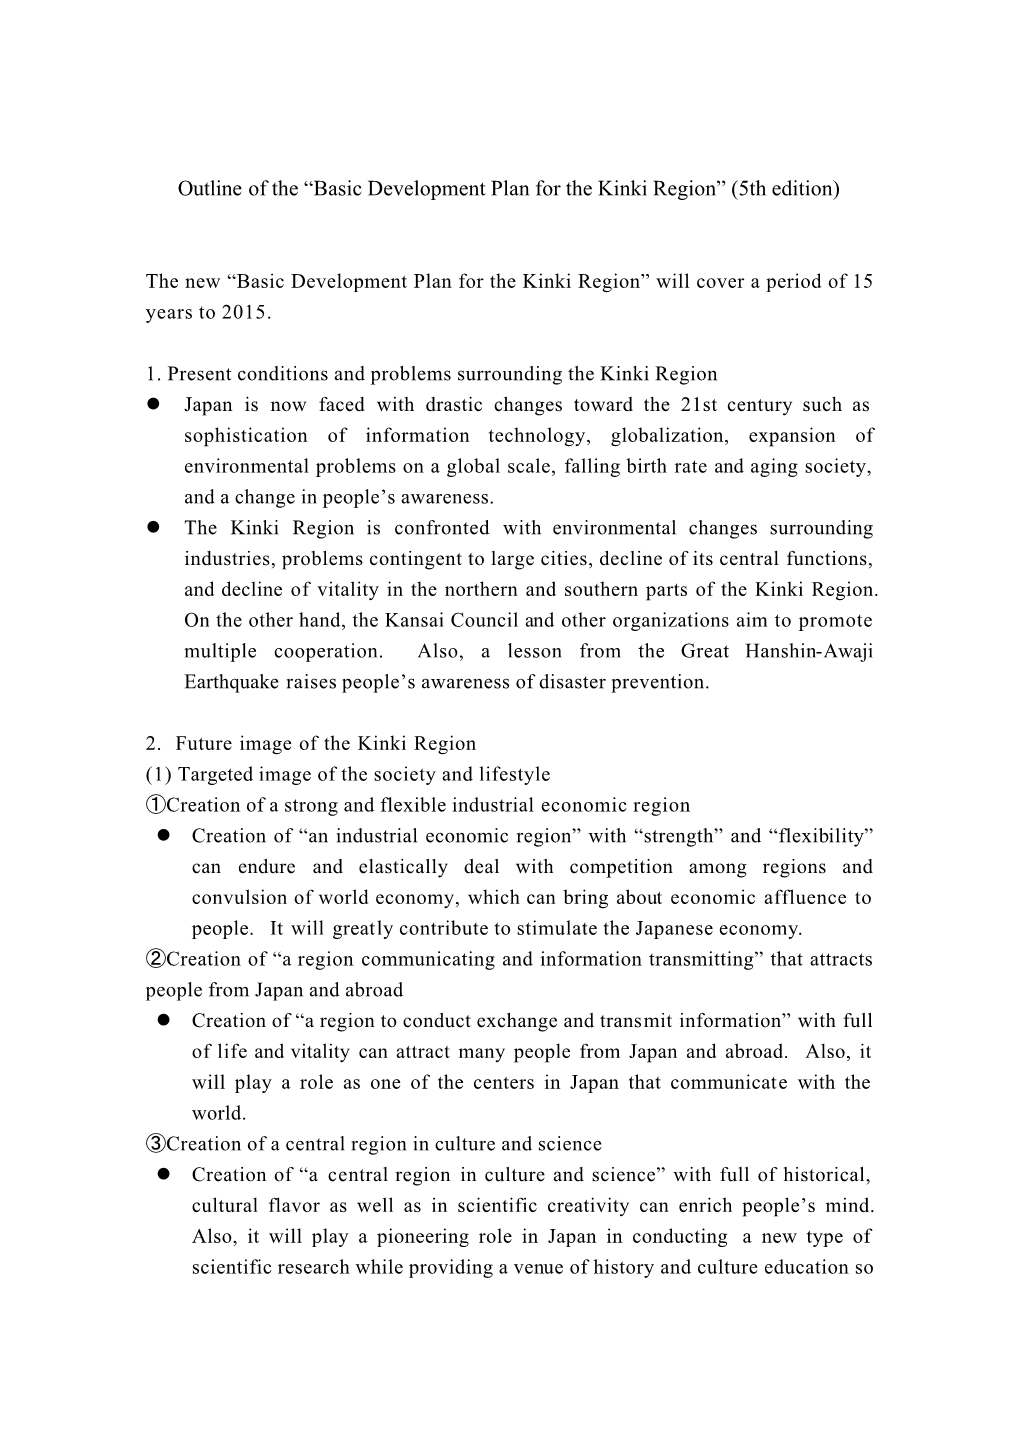 Outline of the “Basic Development Plan for the Kinki Region” (5Th Edition)